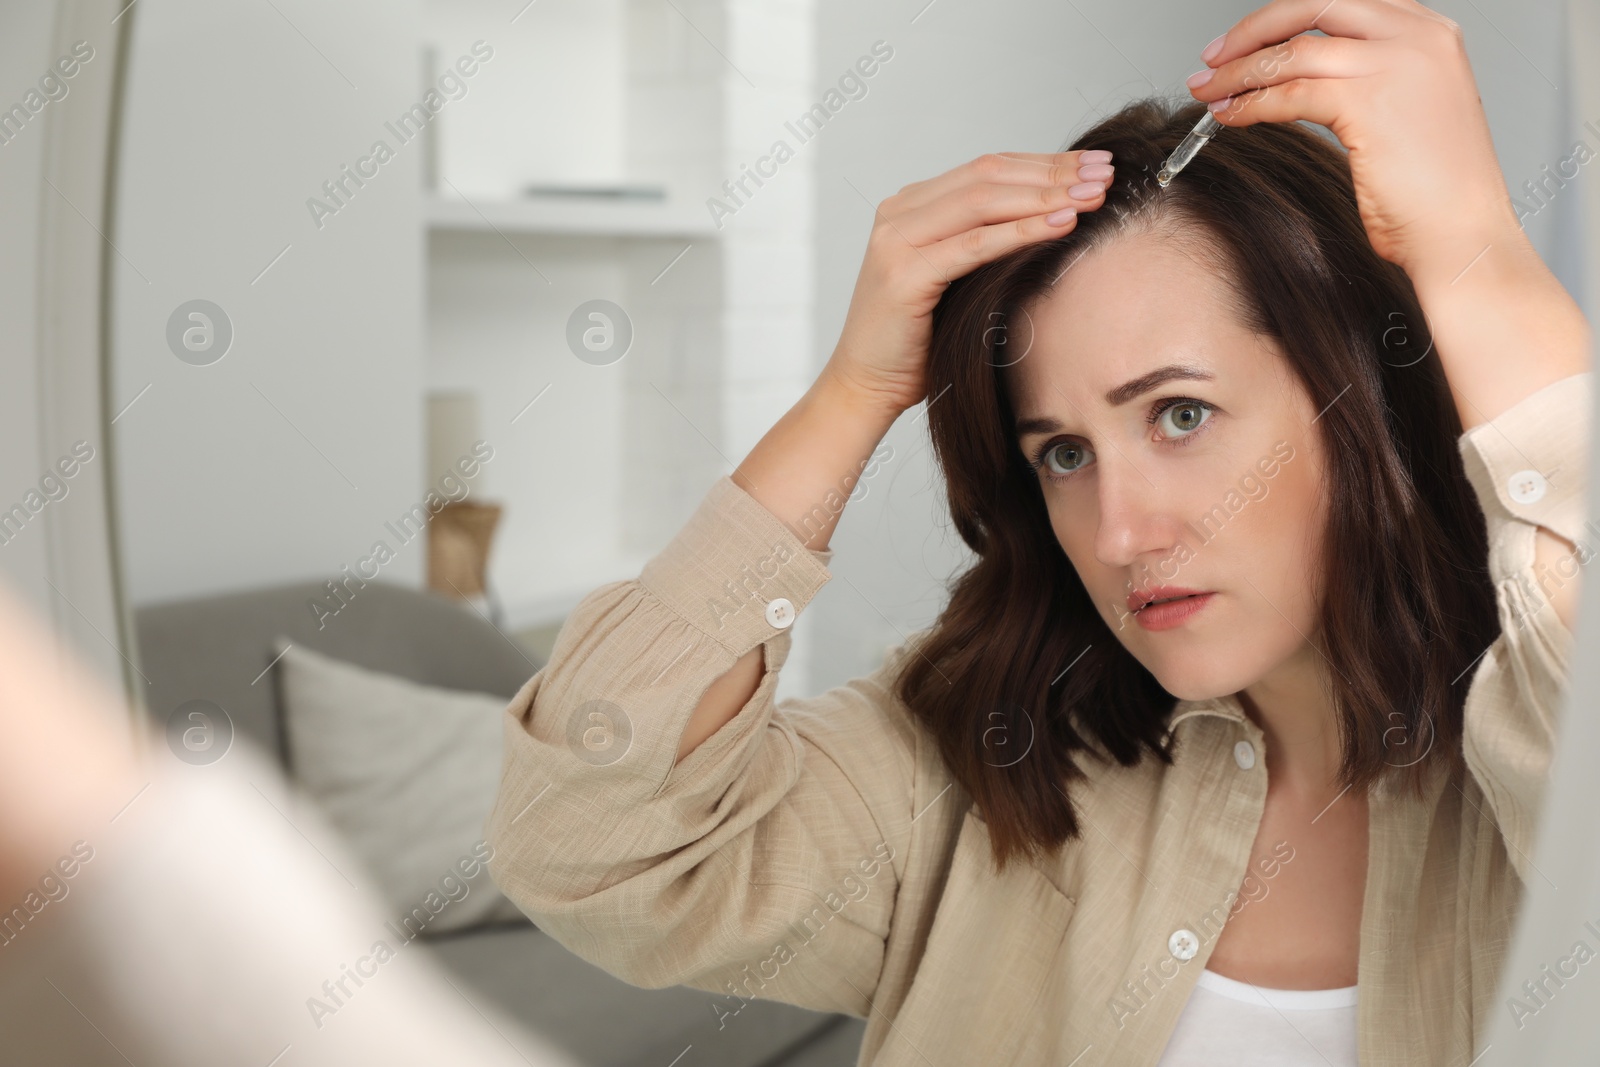 Photo of Hair loss problem. Woman applying serum onto hairline near mirror at home